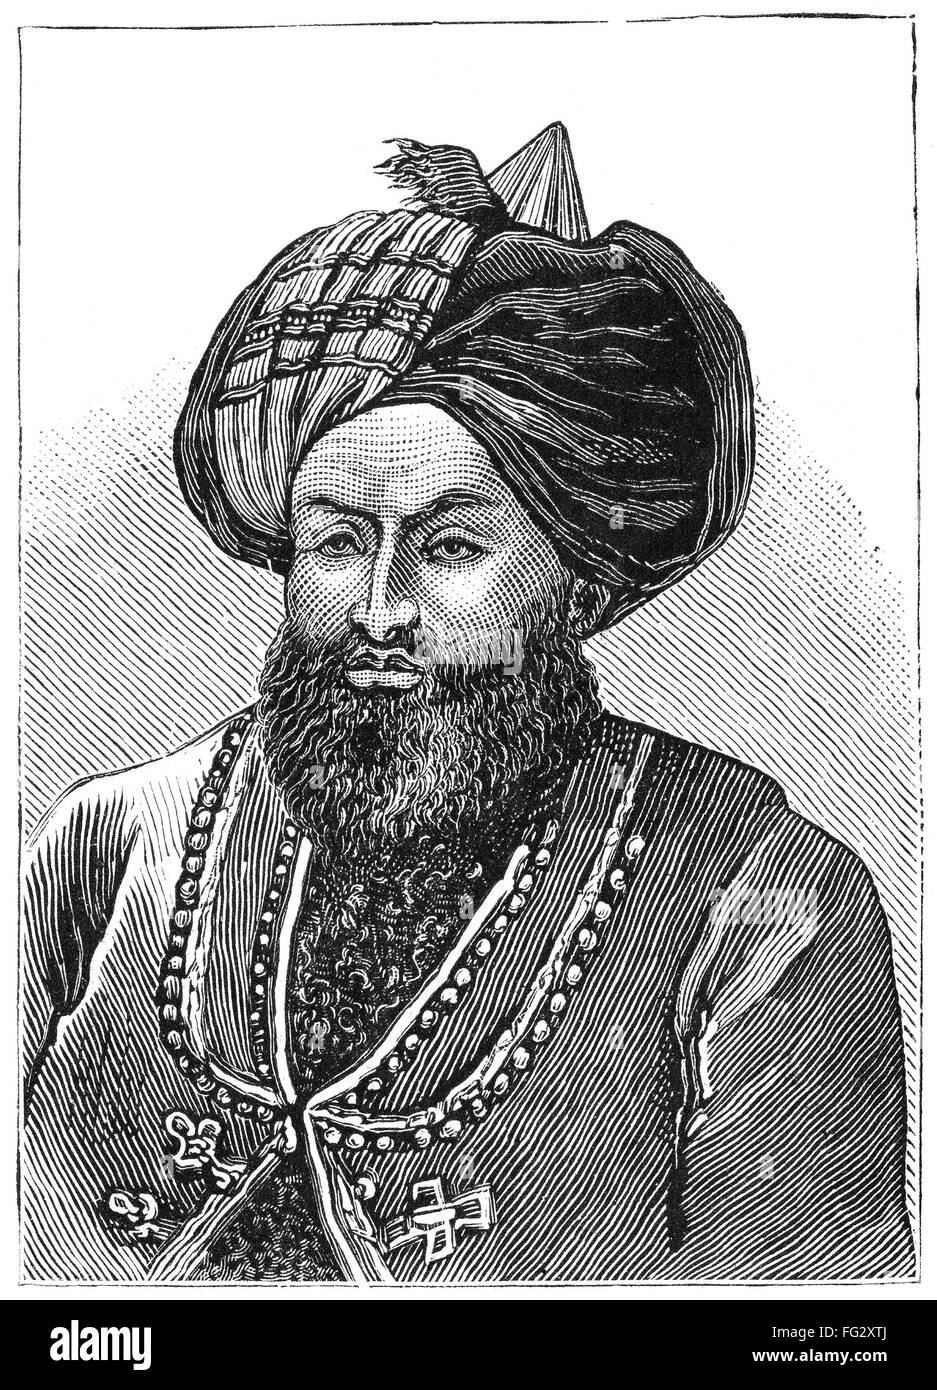 SECOND AFGHAN WAR, 1879. /nGhazi Mohammad Jan Khan Wardak, a leader of a failed attack on British forces in Kabul, Afghanistan, during the Second Anglo-Afghan War, December 1879. Contemporary American wood engraving. Stock Photo